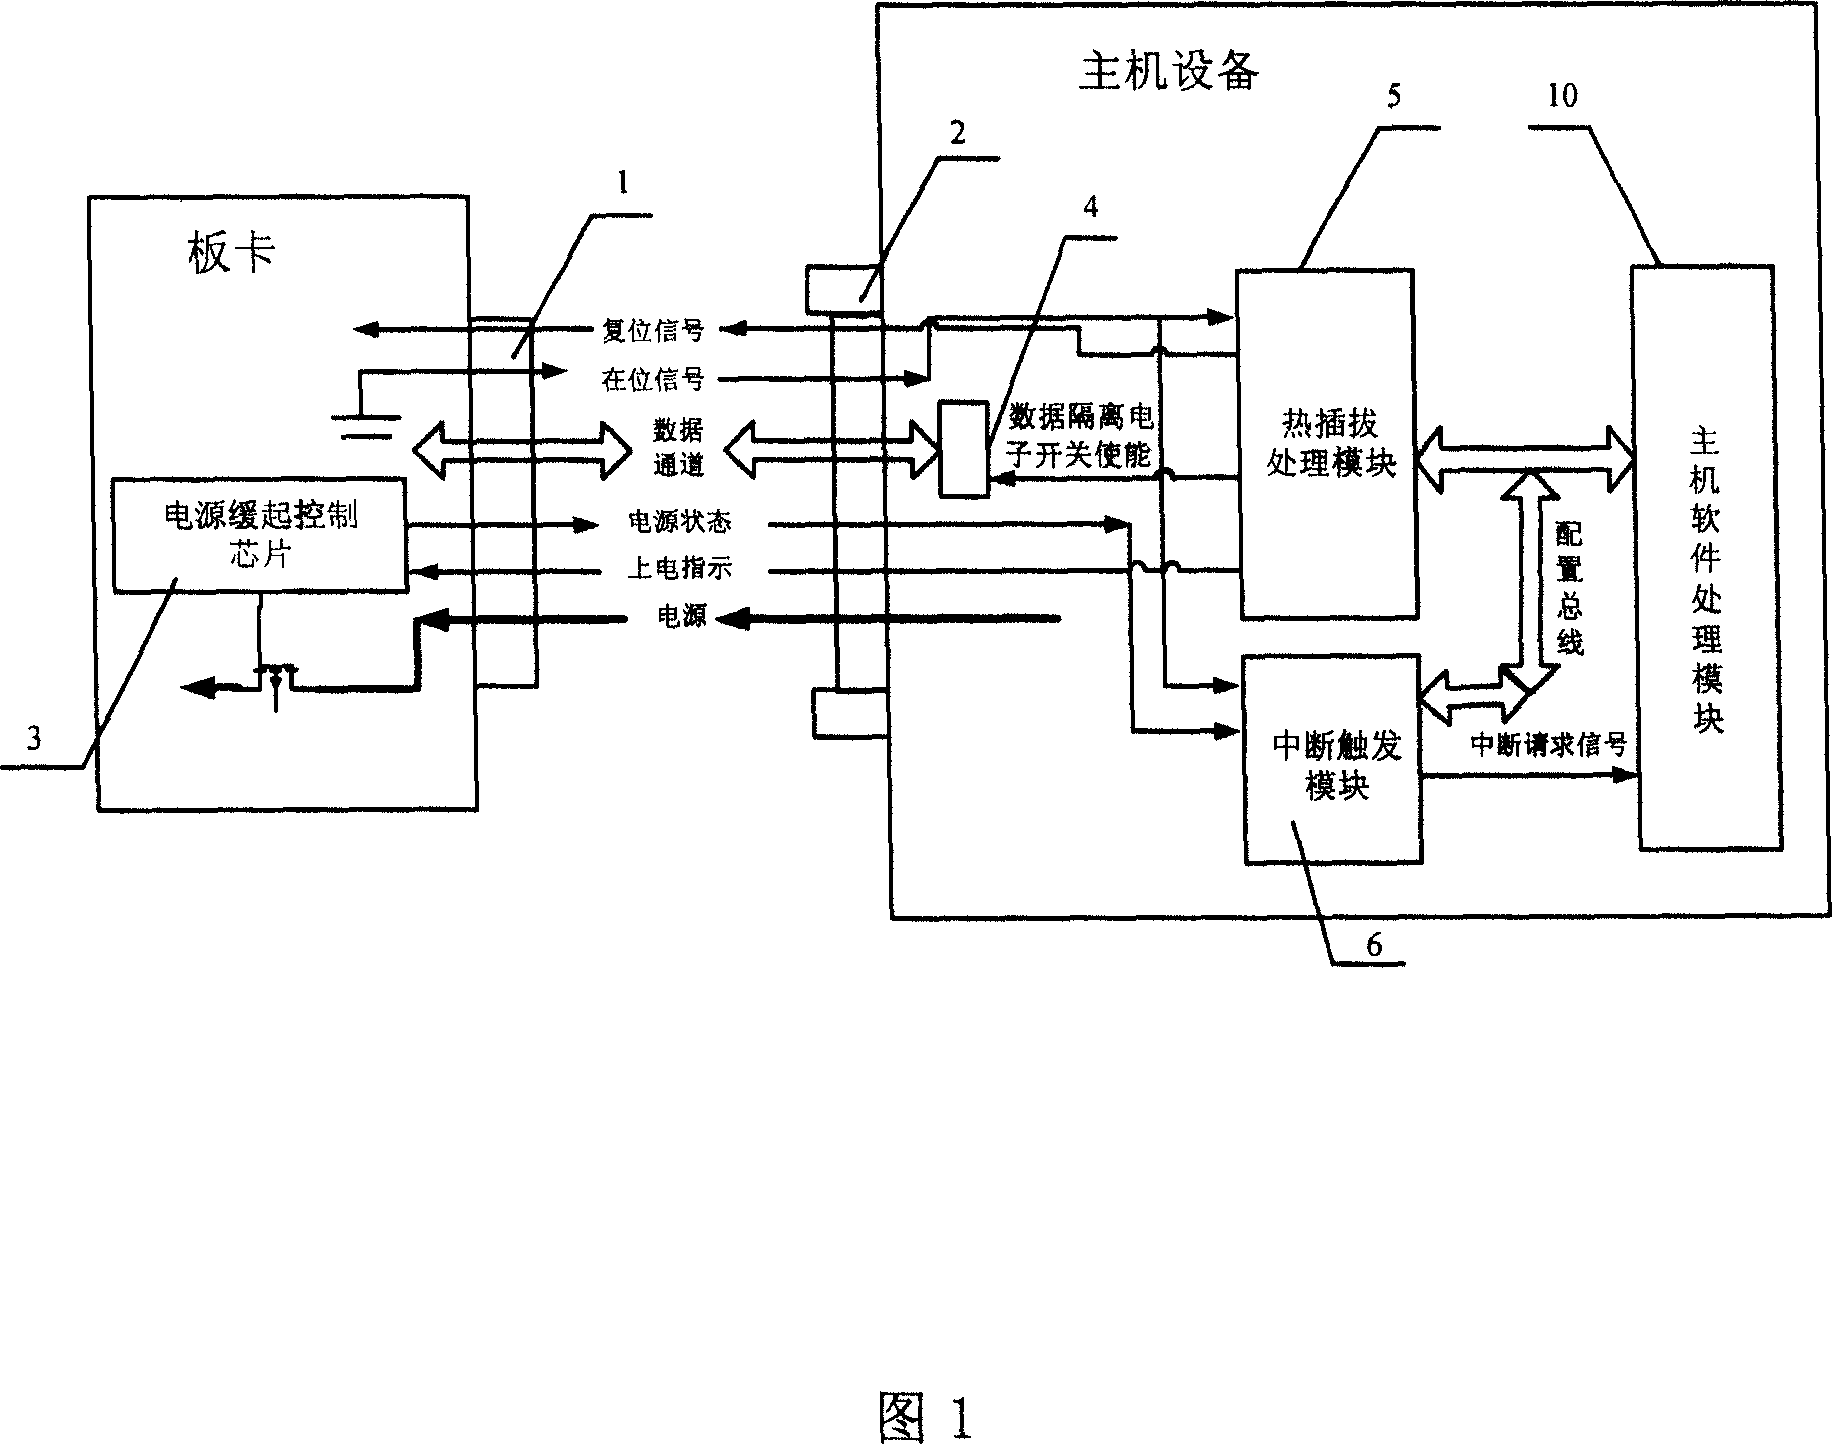 Method and main machine equipment for implementing virtual hot-Swap